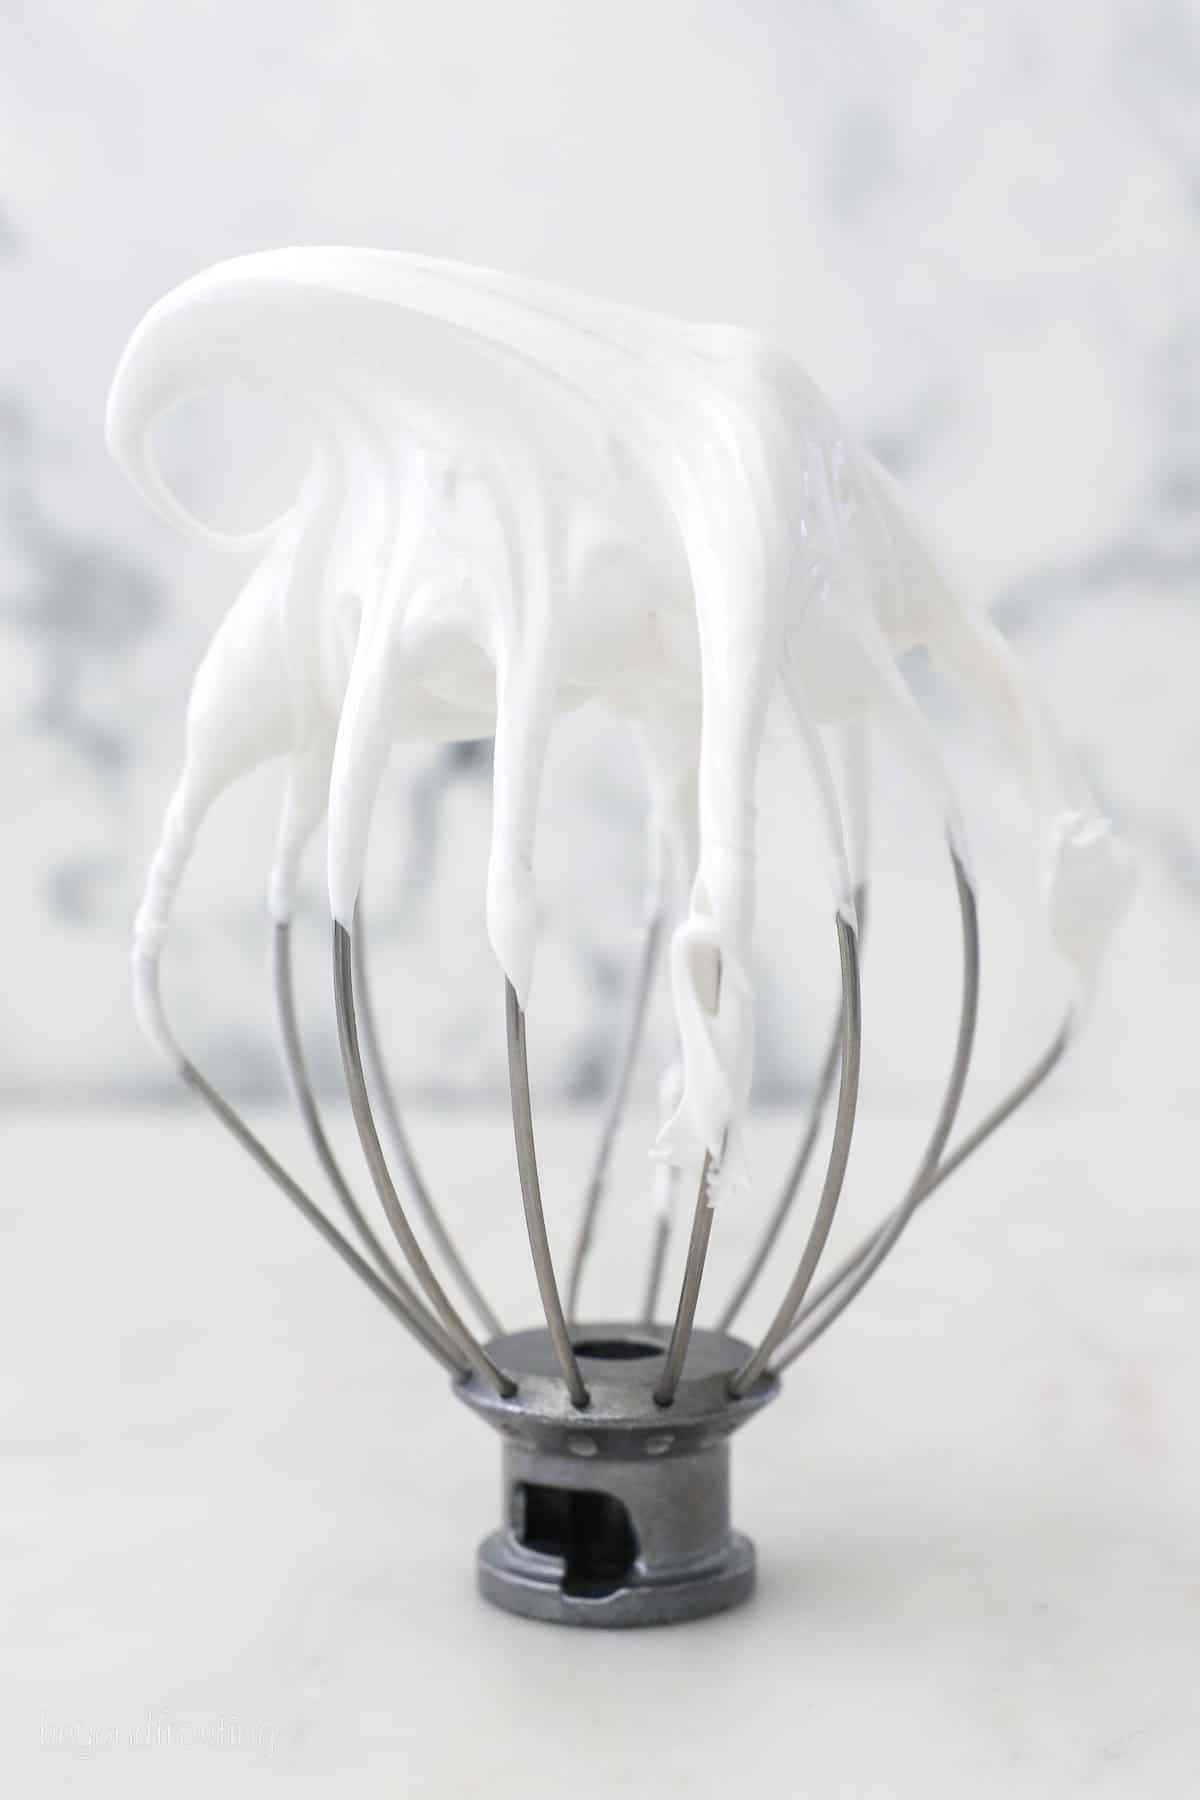 The whisk attachment of a stand mixer propped upright, topped with marshmallow frosting.